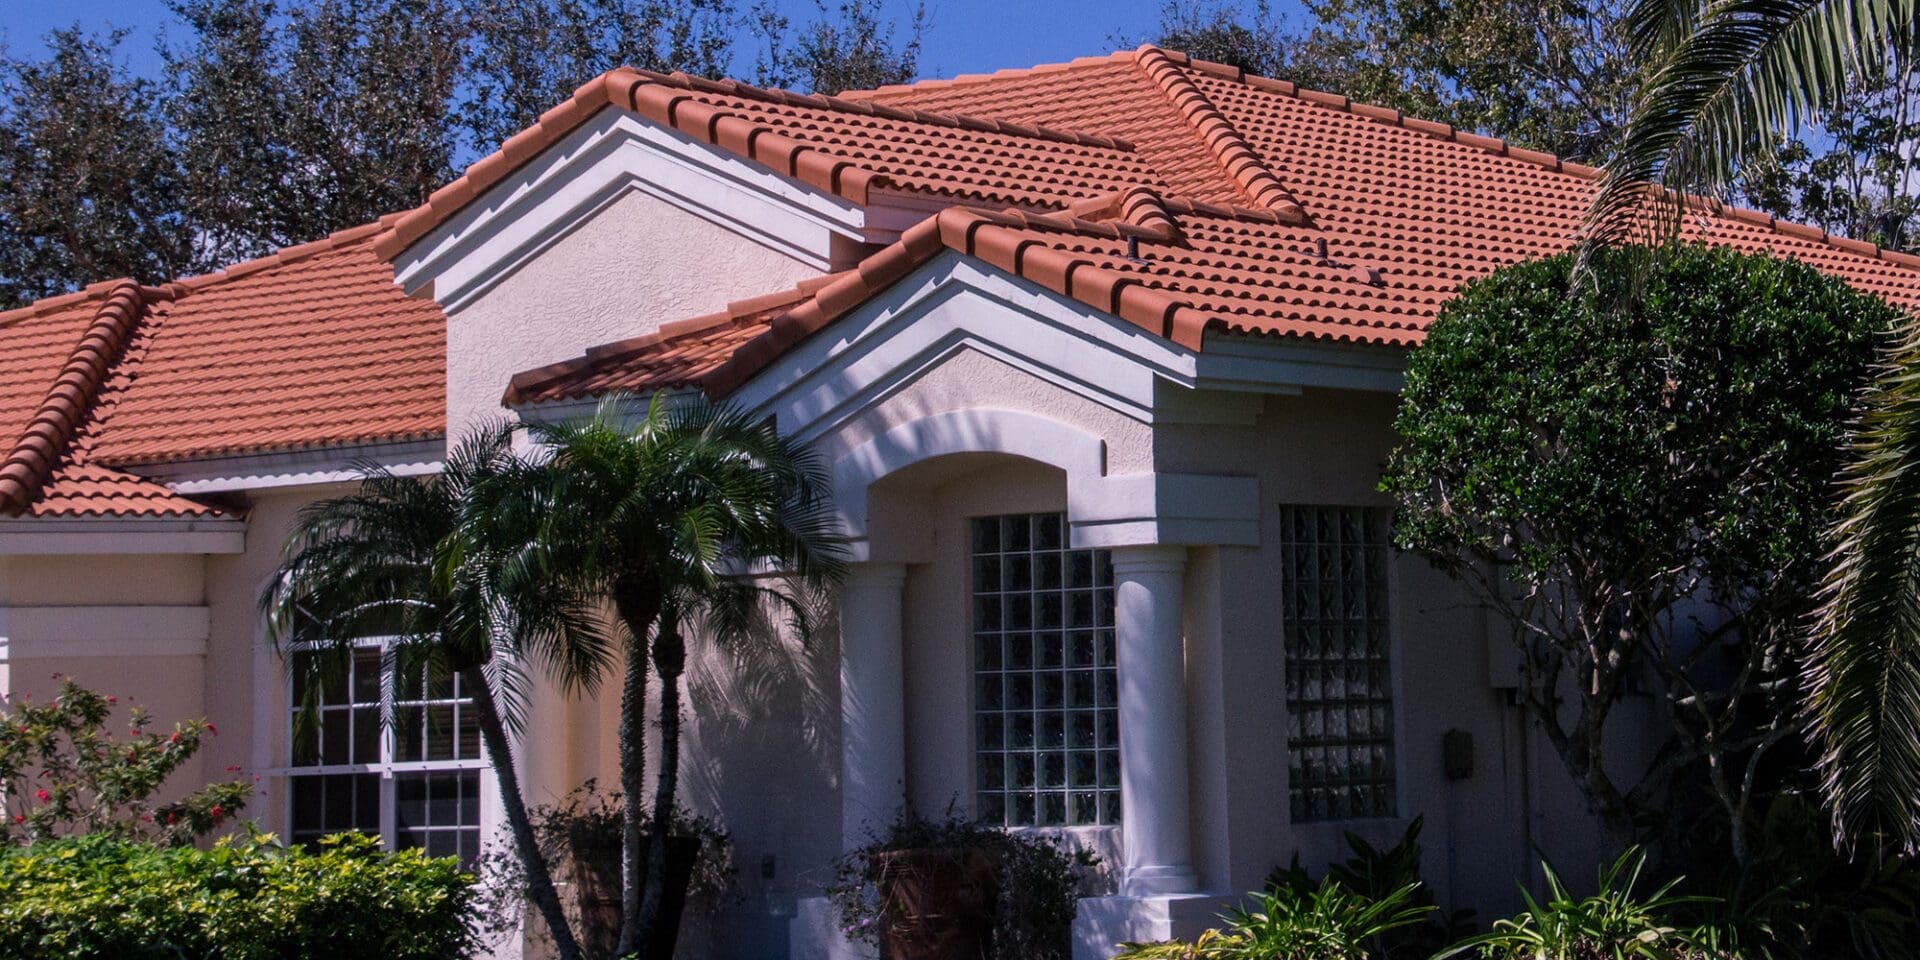 Tile Roof Systems